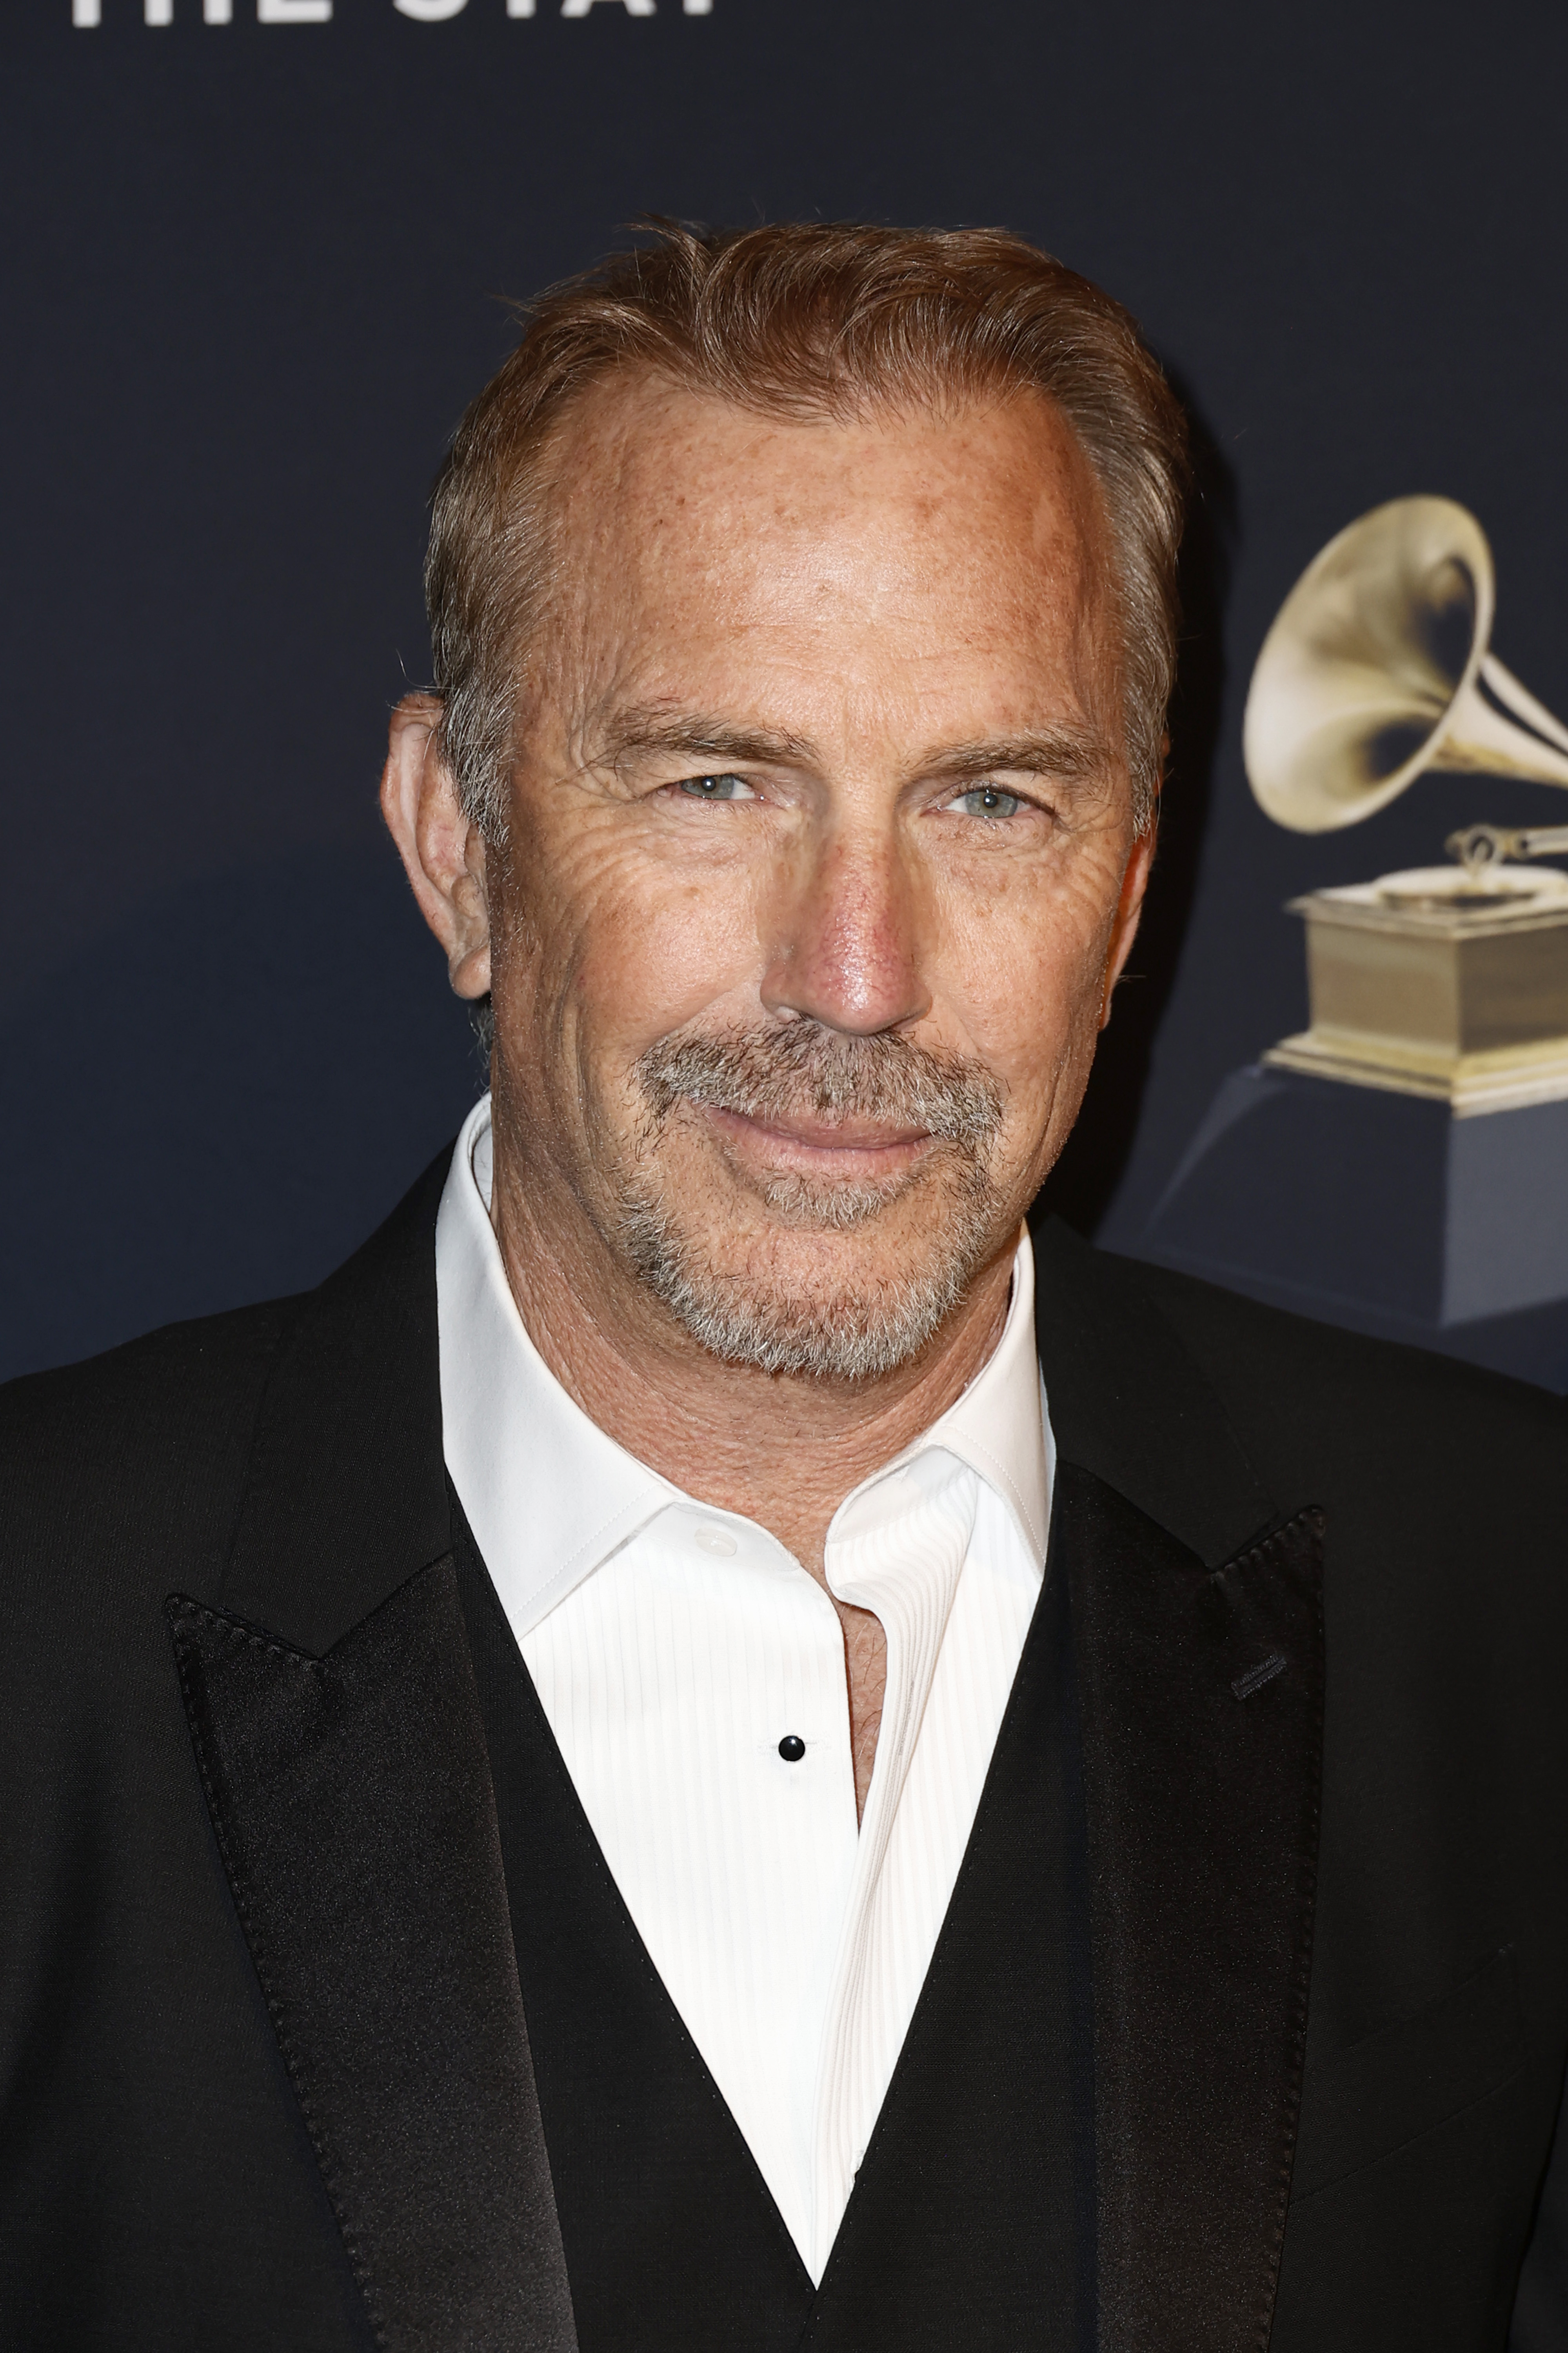 Kevin Costner at the Pre-Grammy Gala in Beverly Hills, California on February 4, 2023 | Source: Getty Images